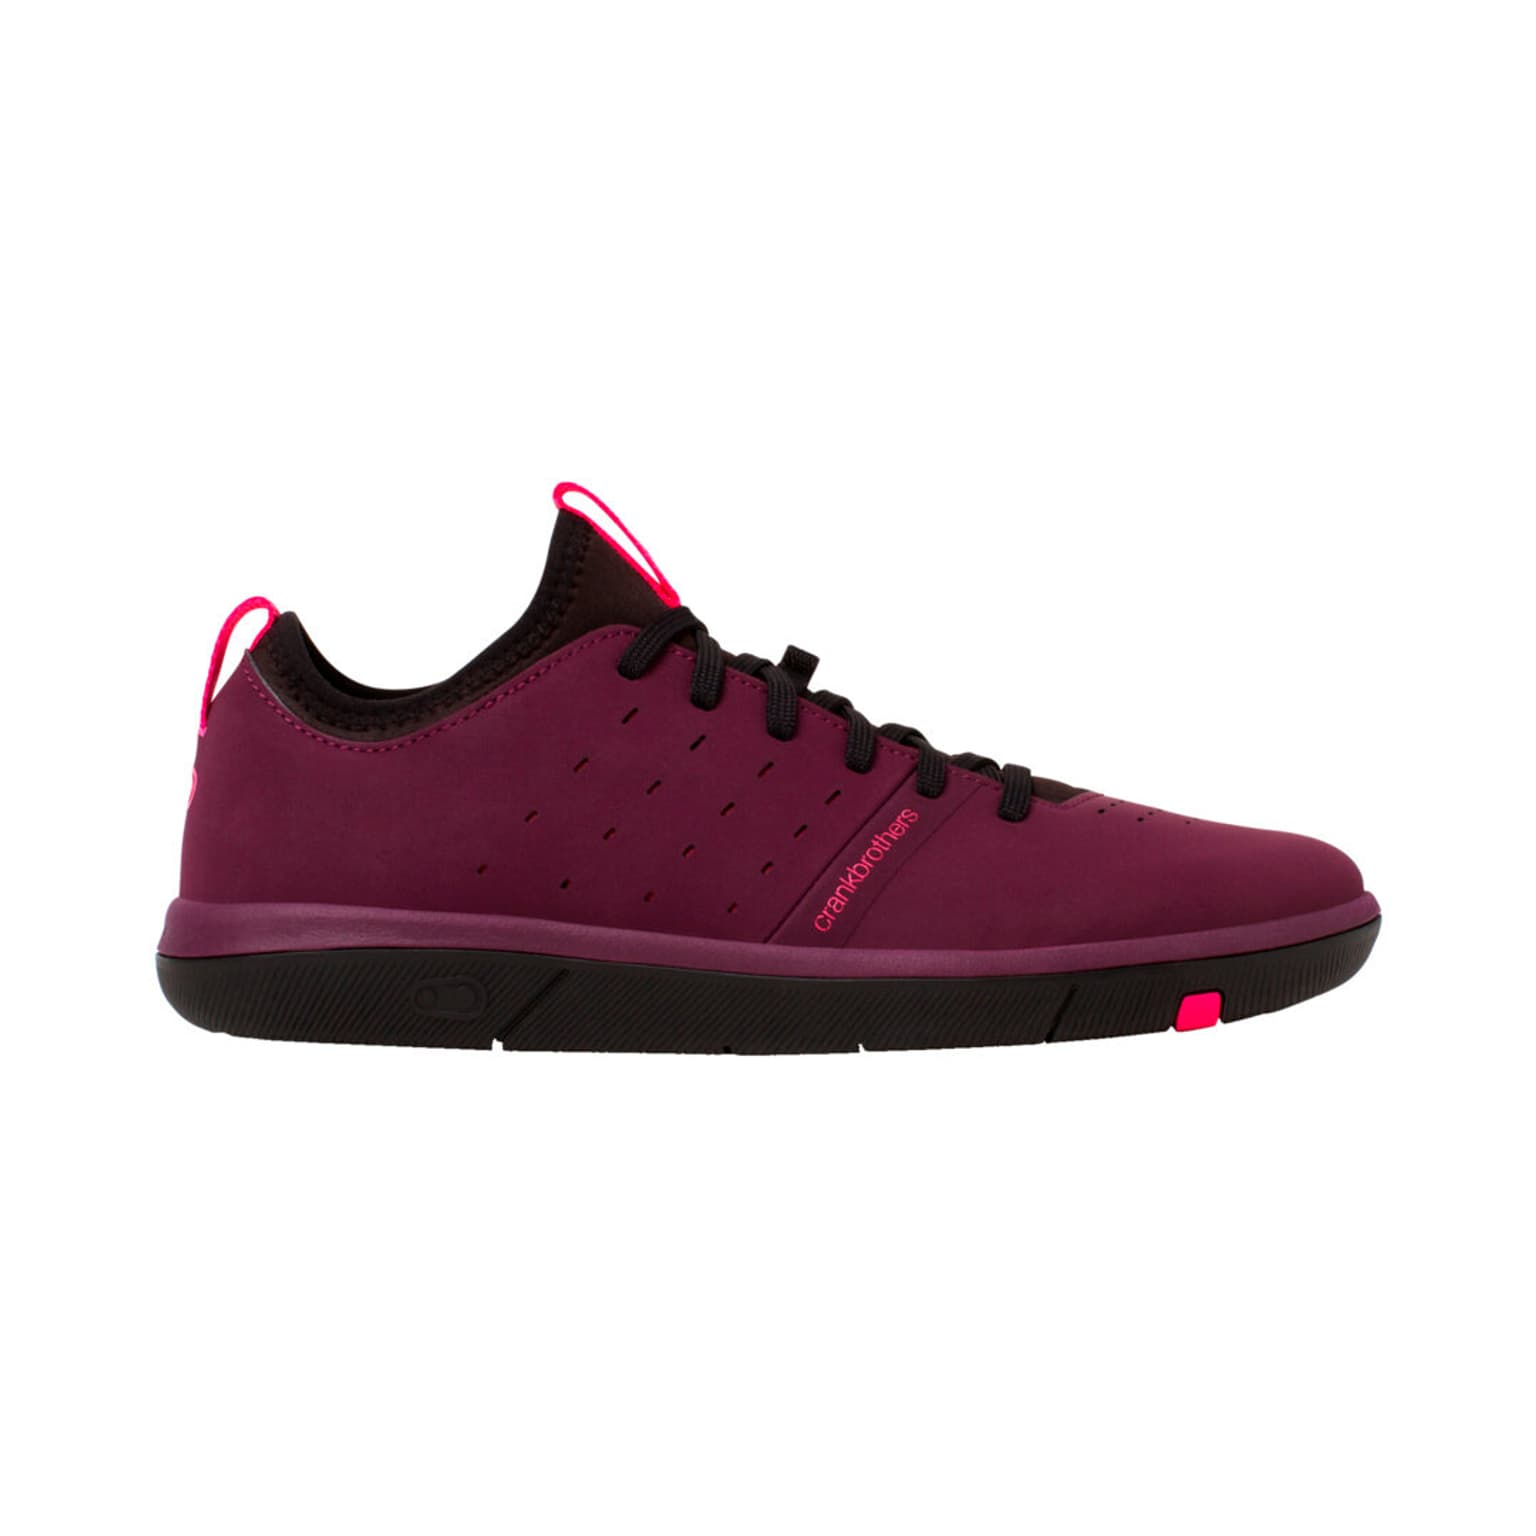 crankbrothers Stamp Street Lace Chaussures de cyclisme aubergine 1